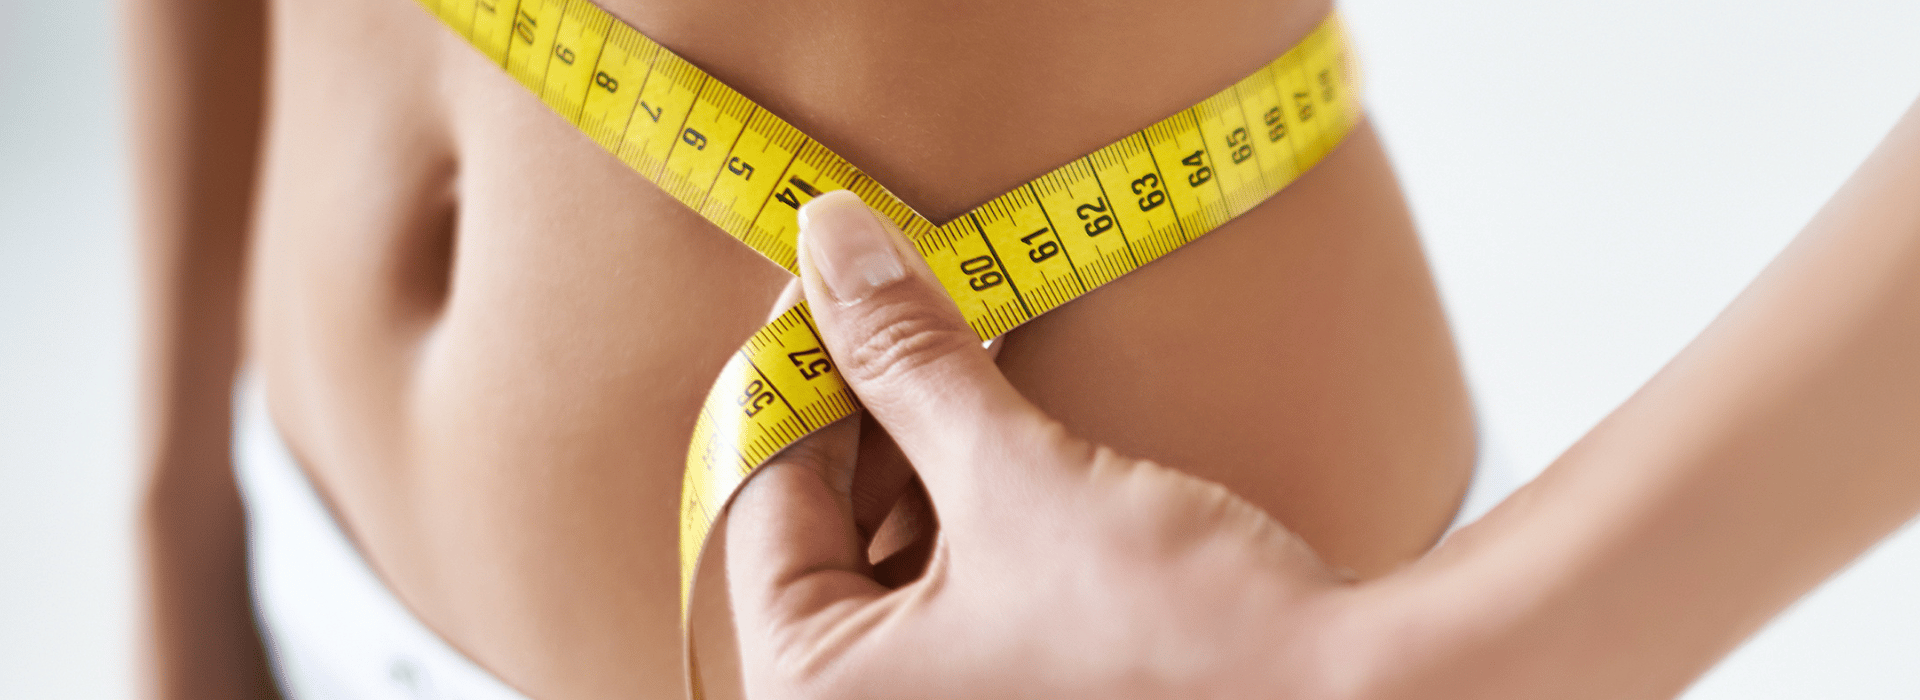 Weight Loss at Wellness 360 Plus in Tampa, FL